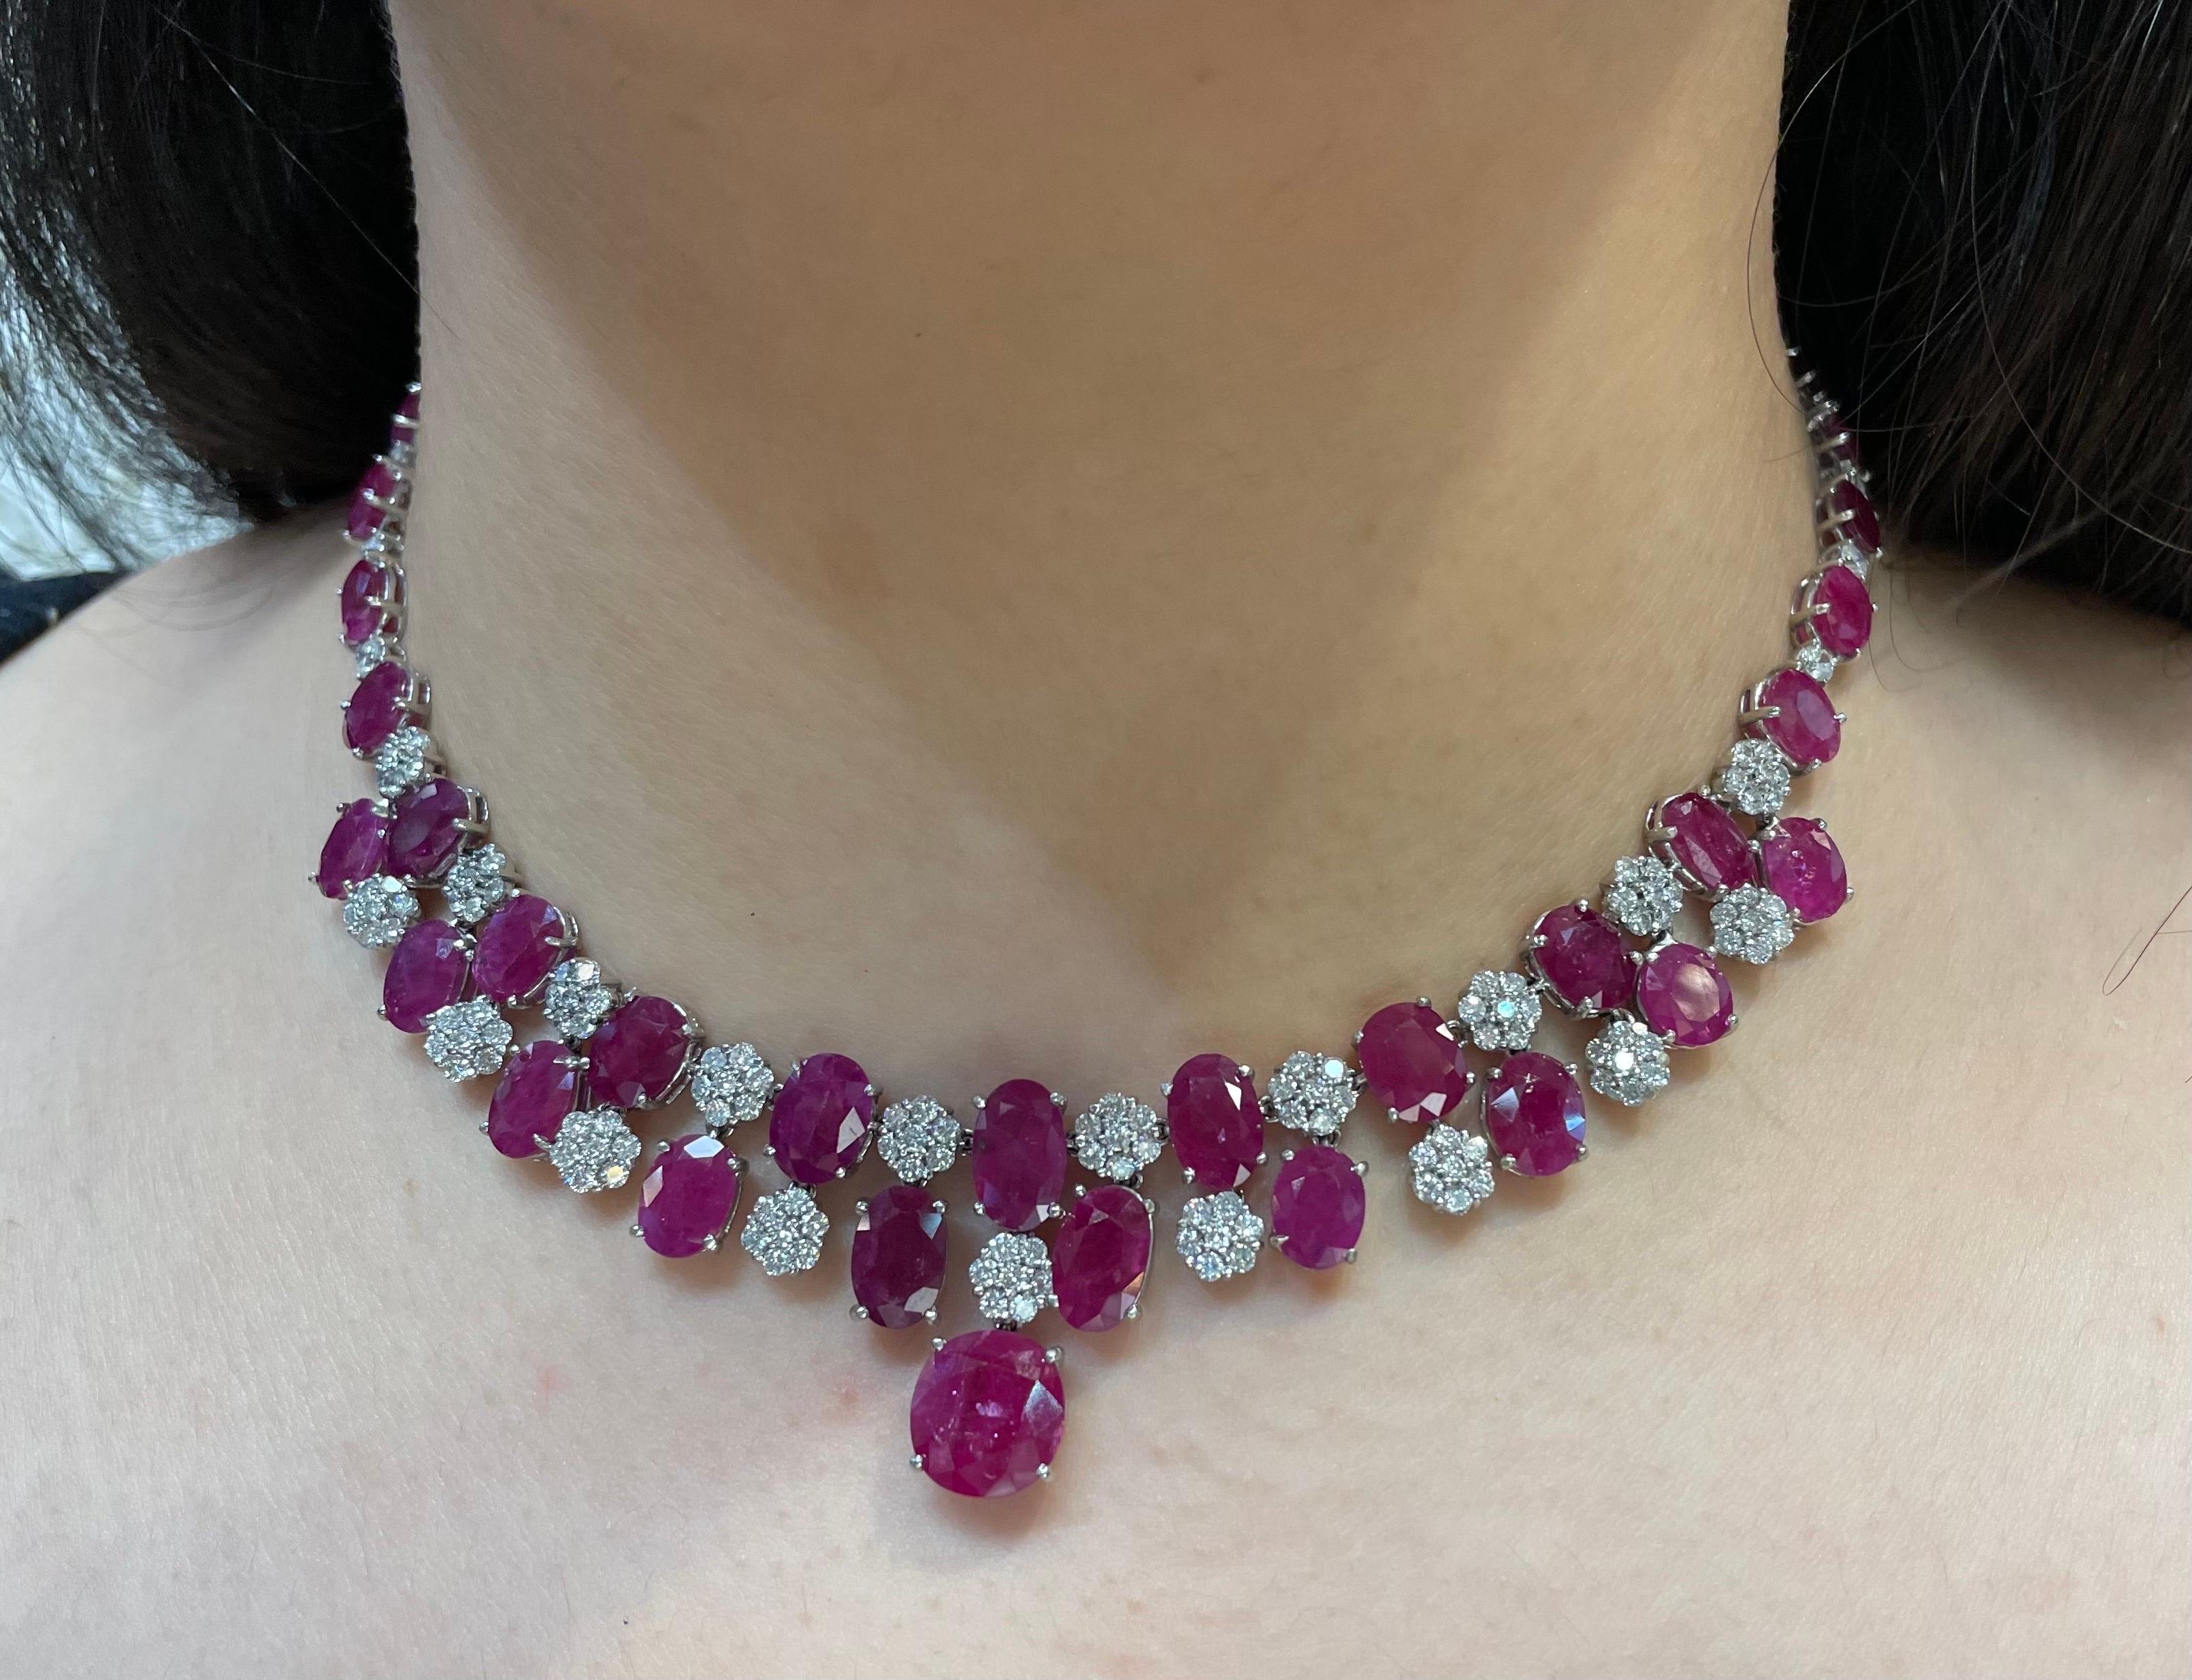 Ruby and Diamond Necklace 

A necklace with 43 oval-cut rubies separated by round-cut diamonds set in a floral motif

Approximately Measures: 16